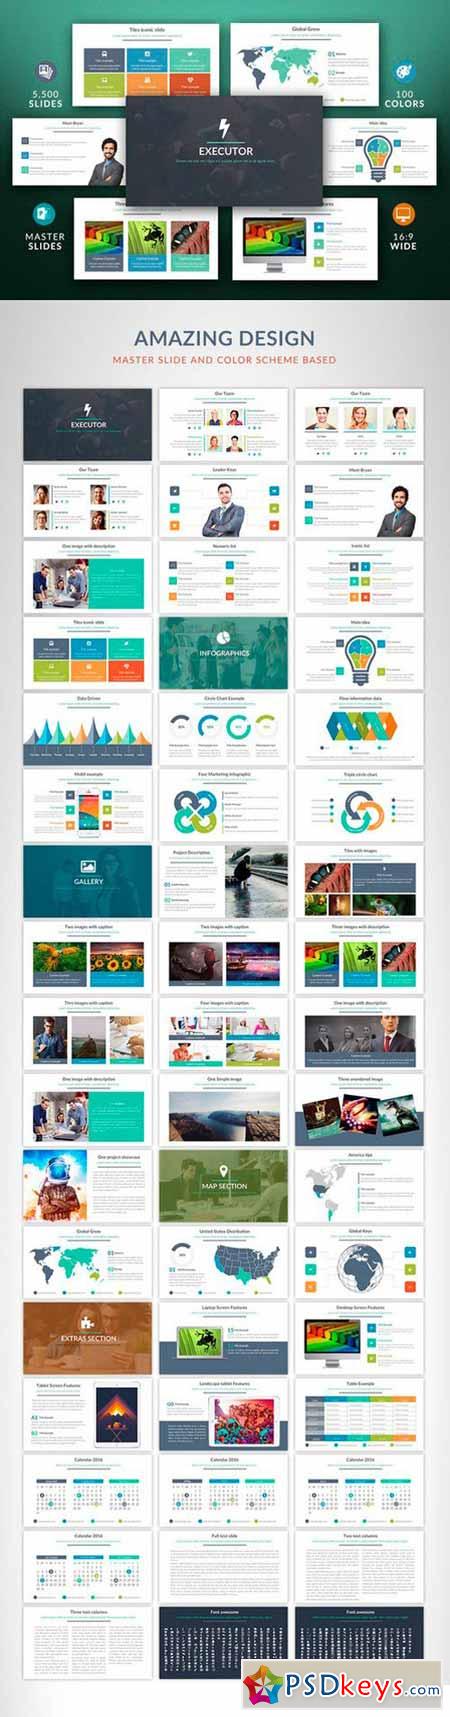 Executor Powerpoint template 489553